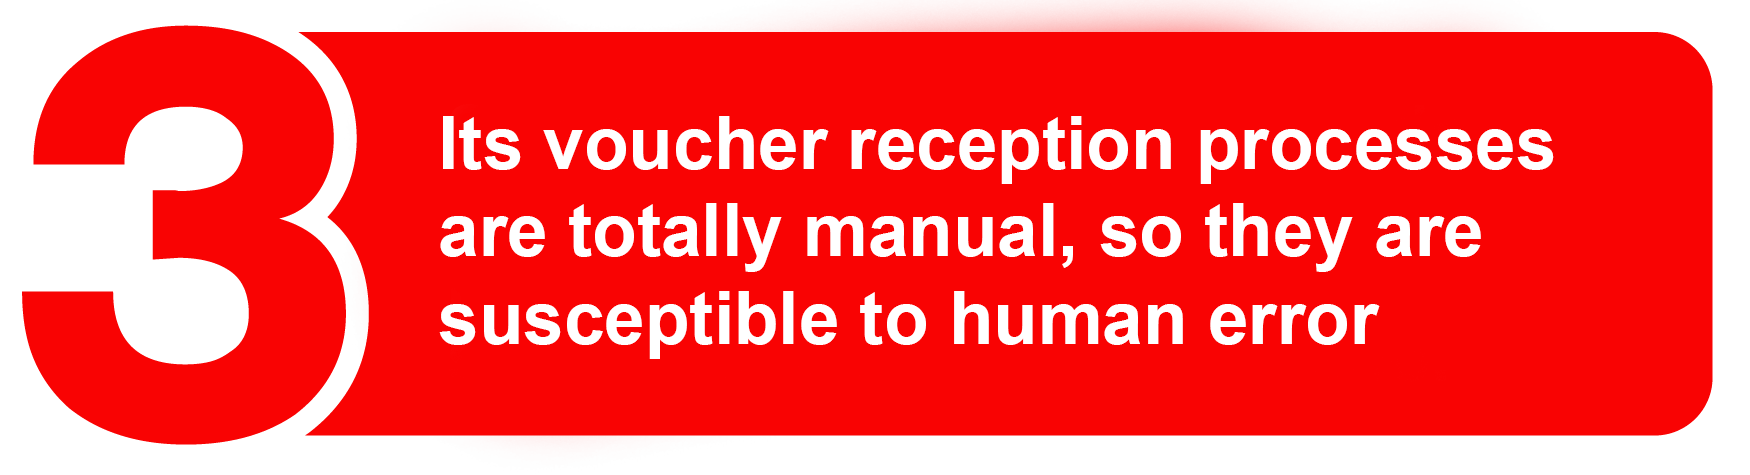 Its voucher reception porcesses are totally manual, so they are susceptible to human error